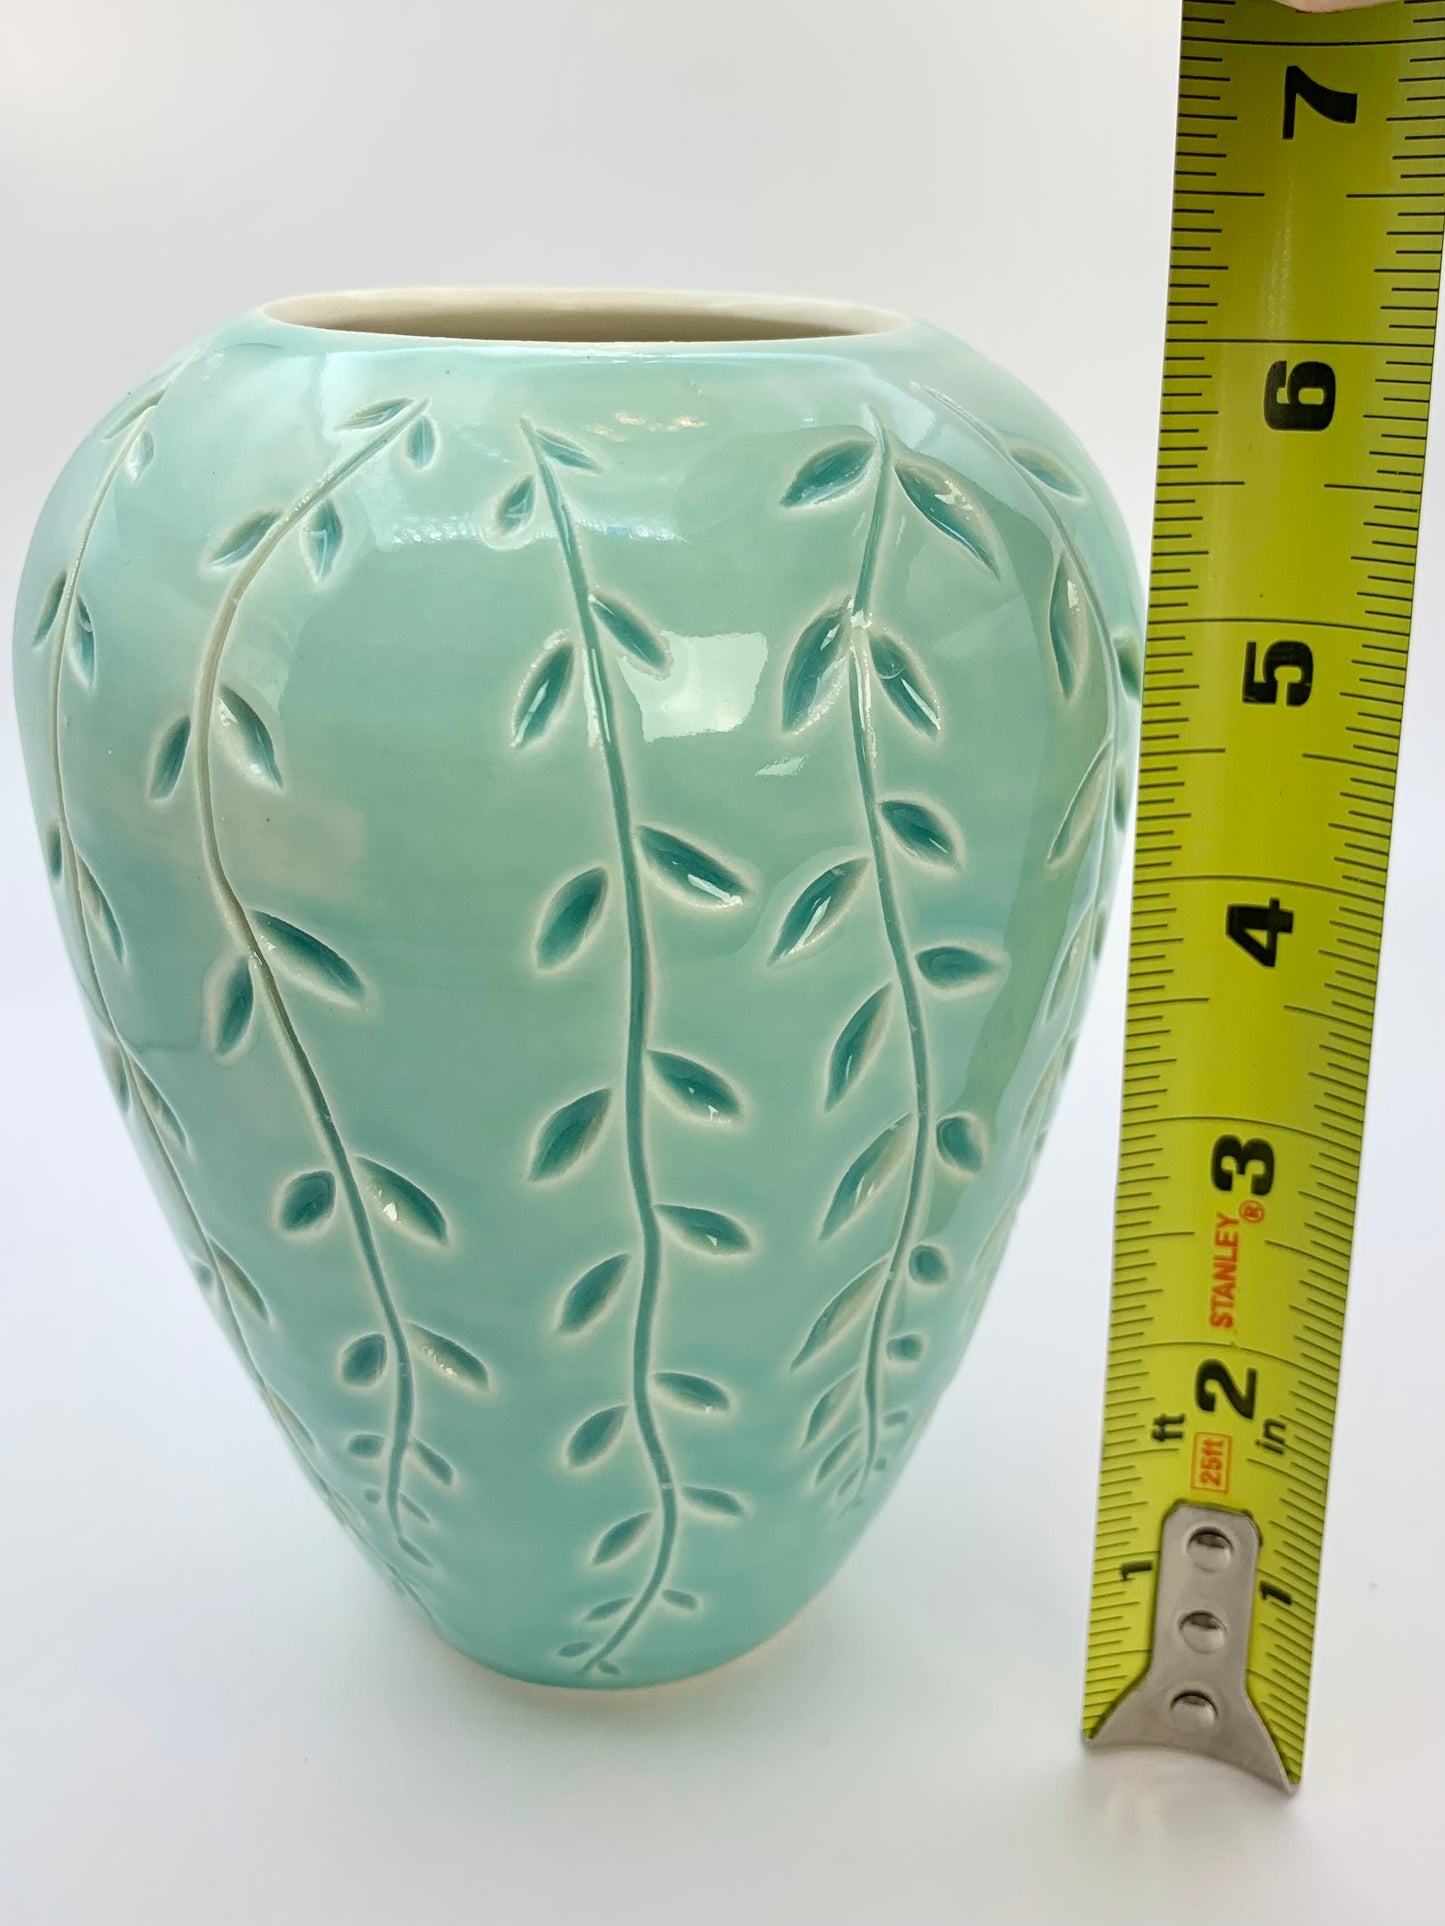 Porcelain vase with vine carvings in turquoise